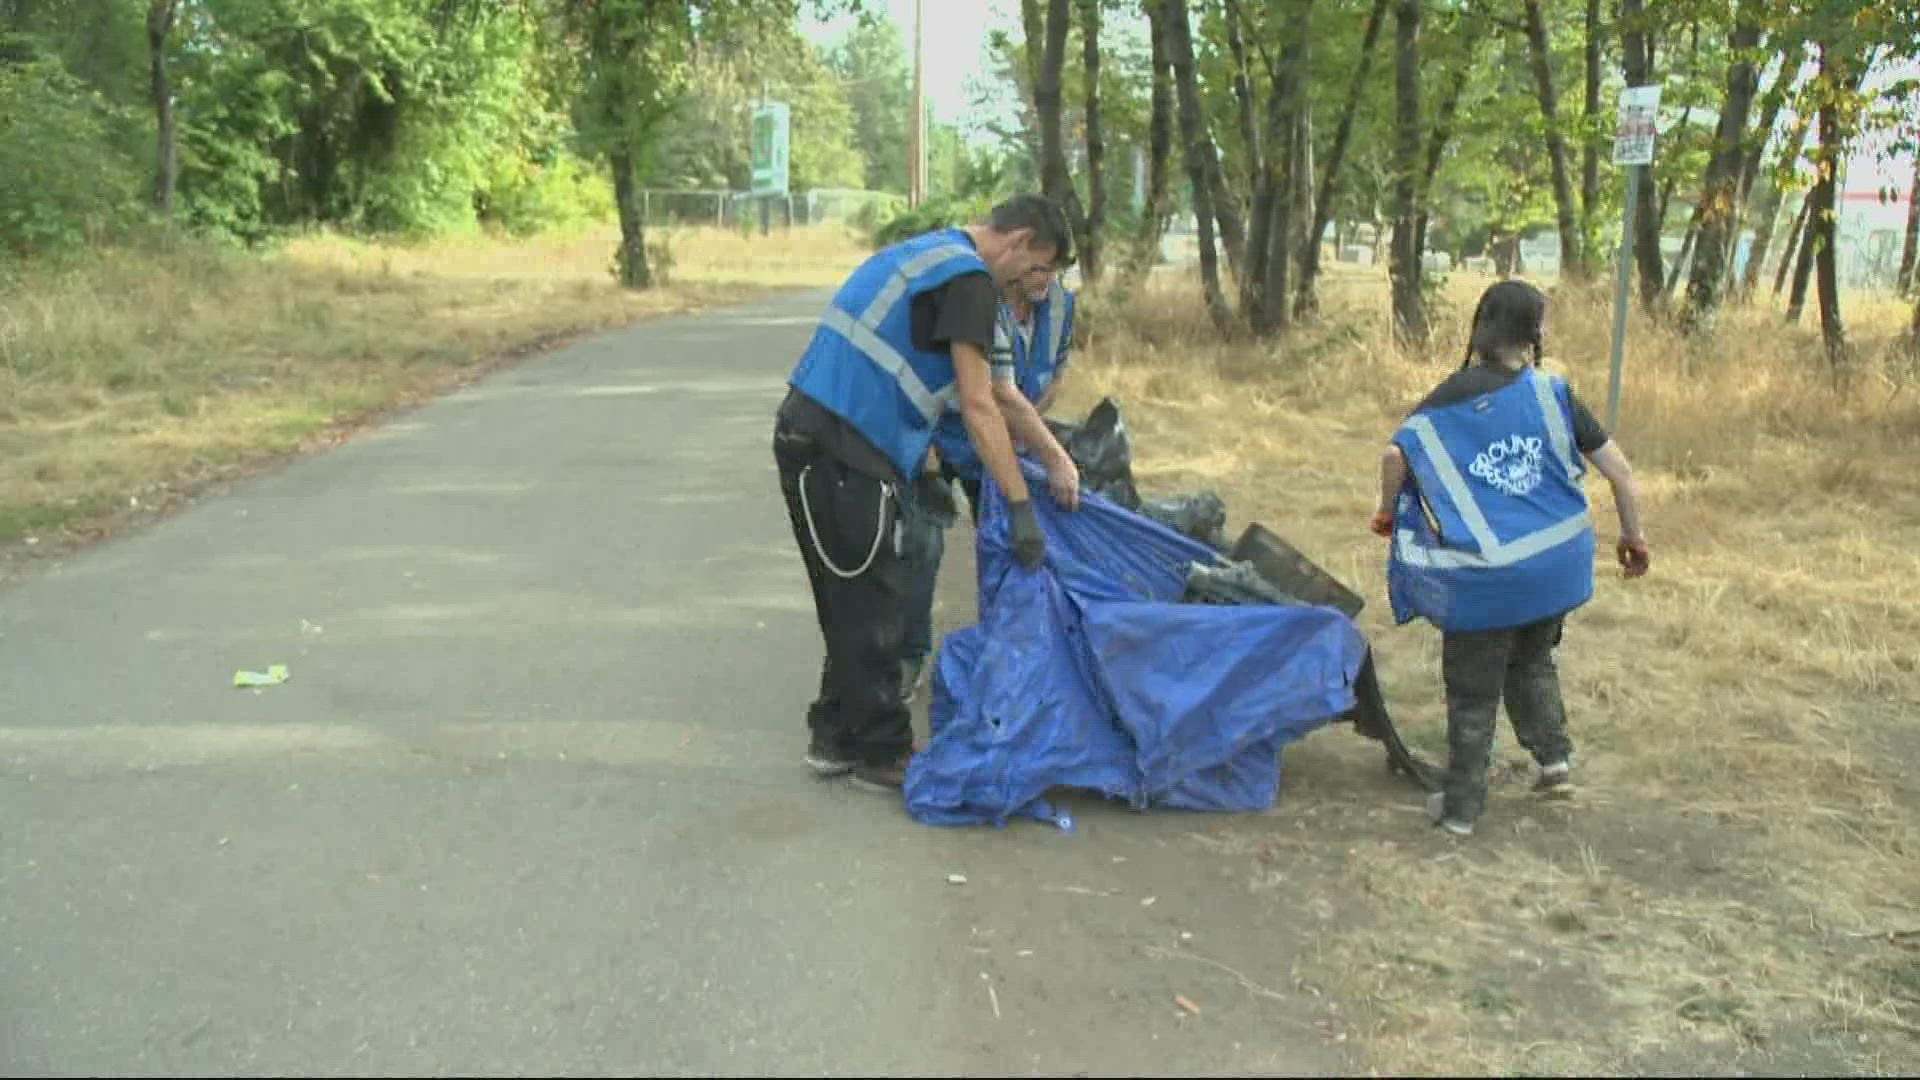 Since February, homeless people have cleaned up 680,000 pounds of trash along Portland streets and highways.